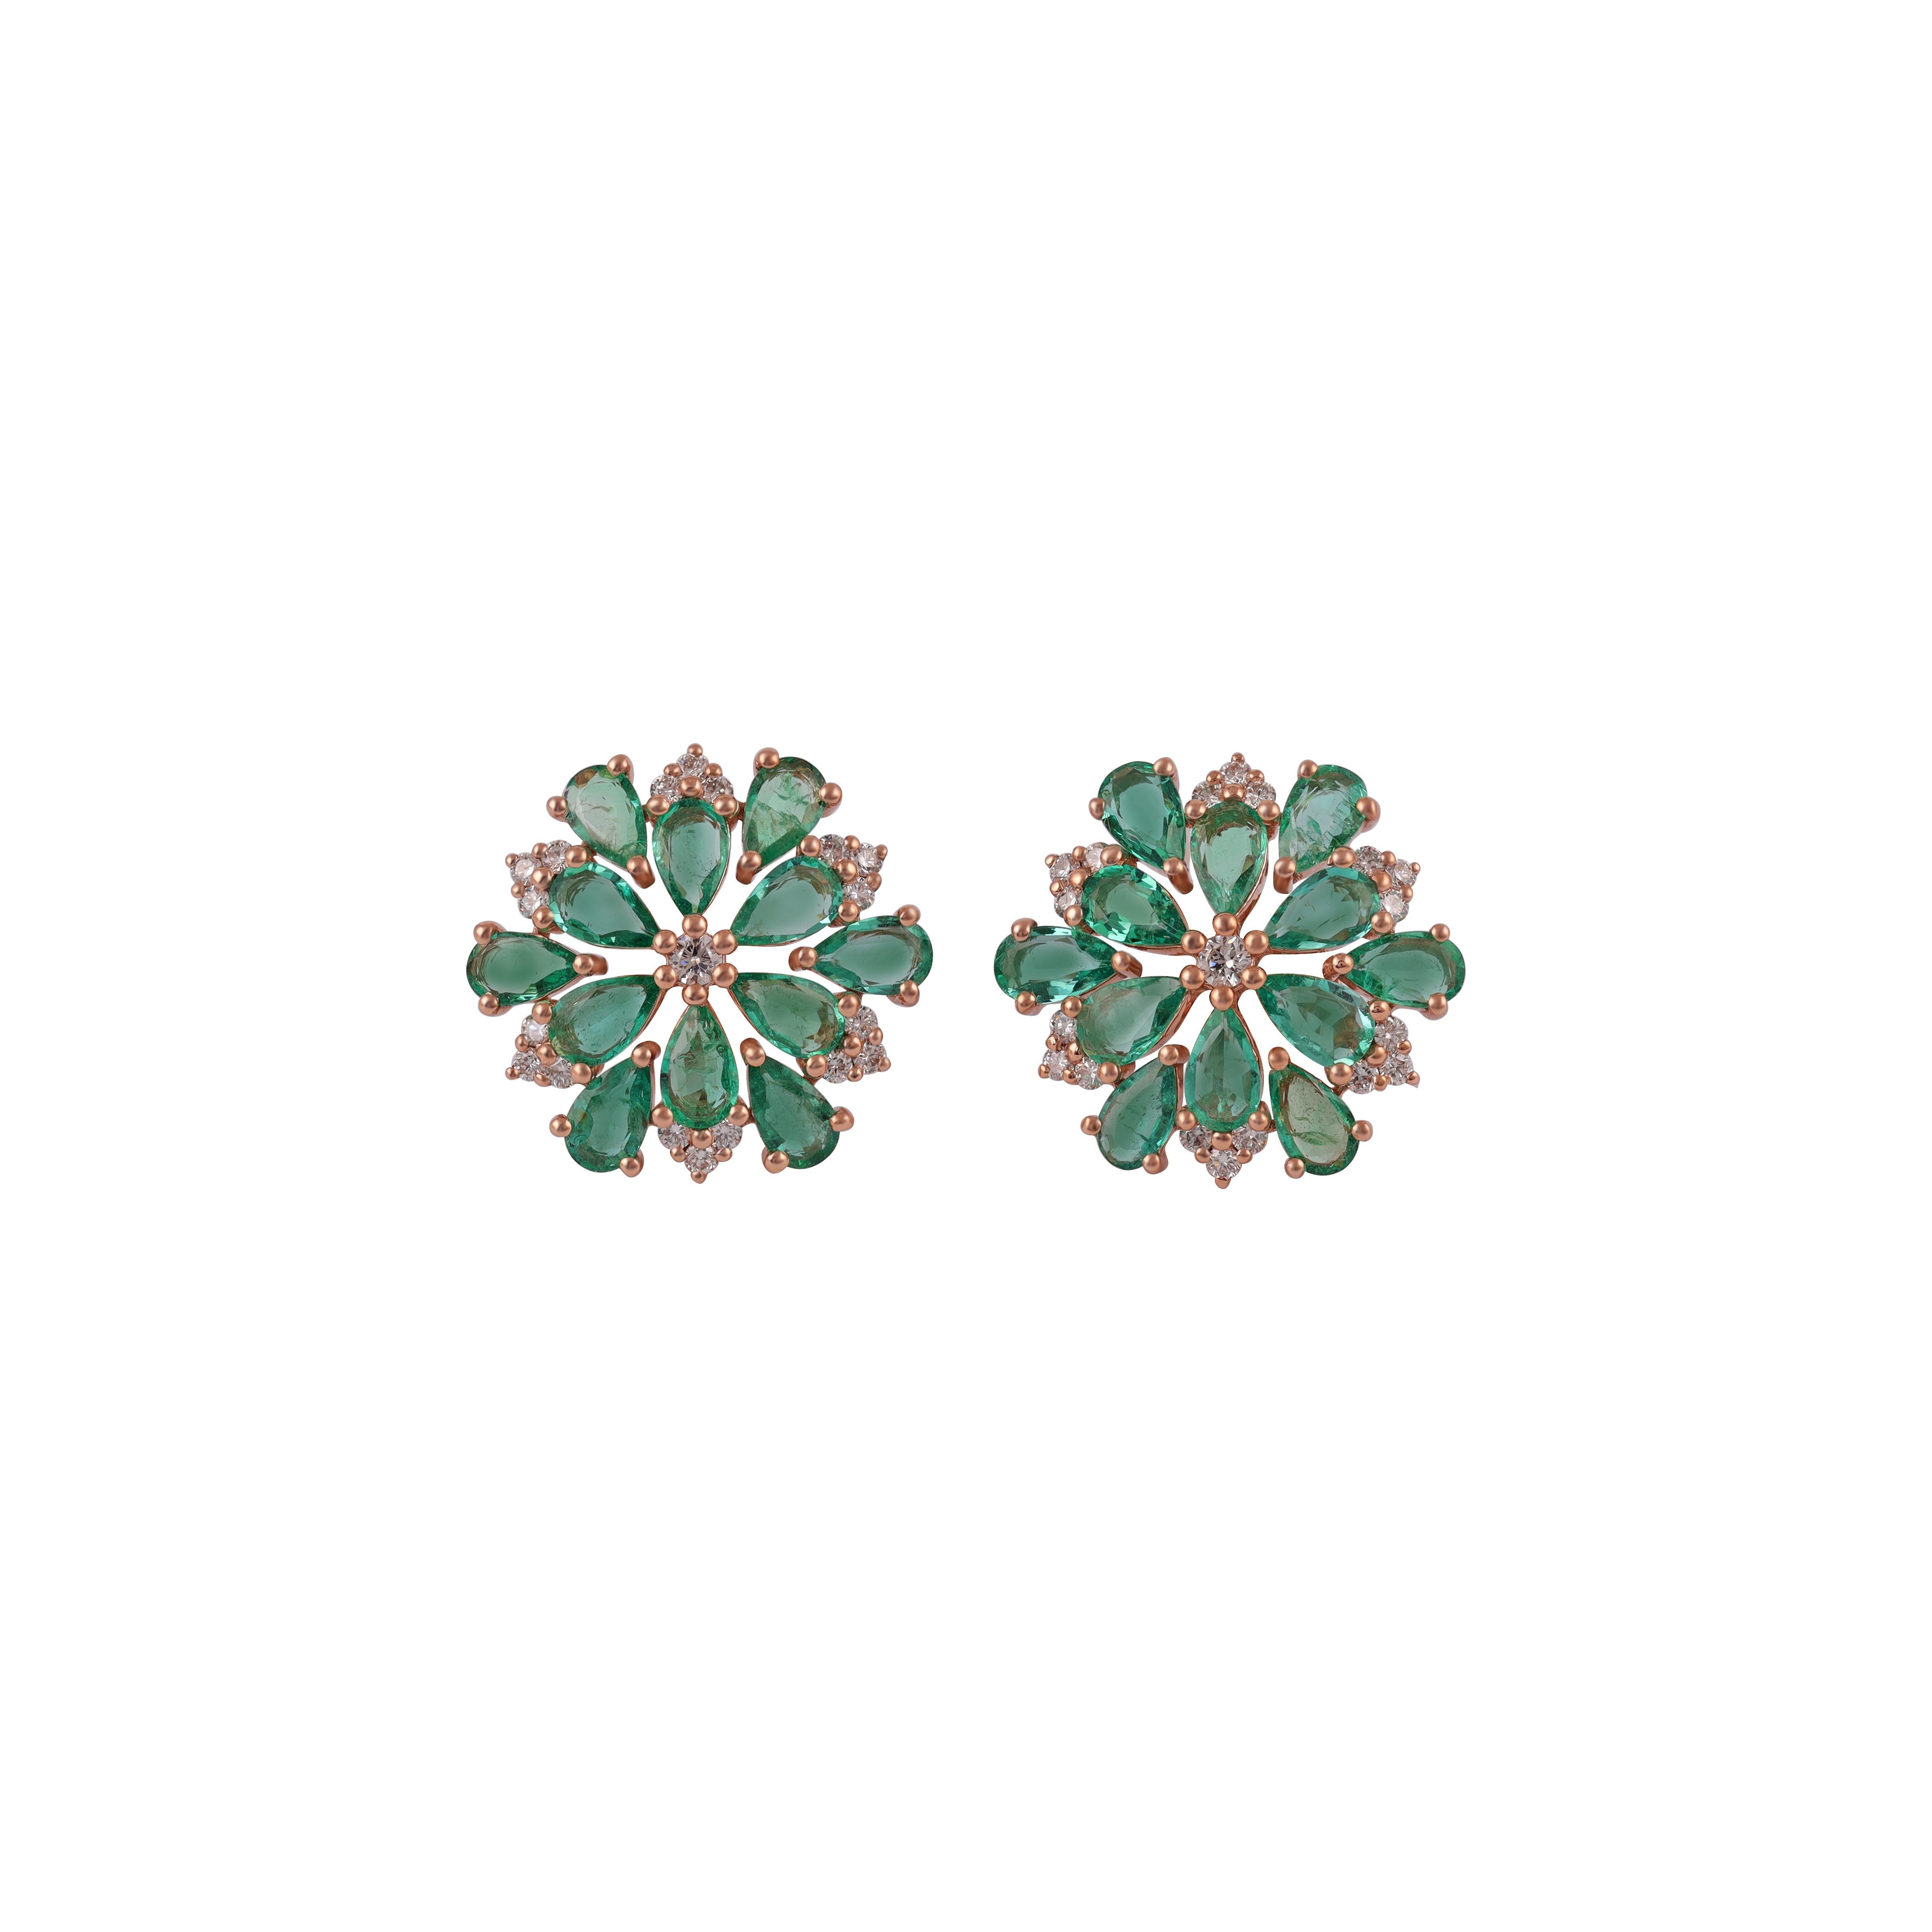 This is an elegant Stud earring pair with emerald & diamonds feature 24 pieces  emeralds weight 2.76carats, 38 pieces of  diamonds weight 0.42 carat , these earrings entirely made in 18K Rose gold weight 4.87 grams.